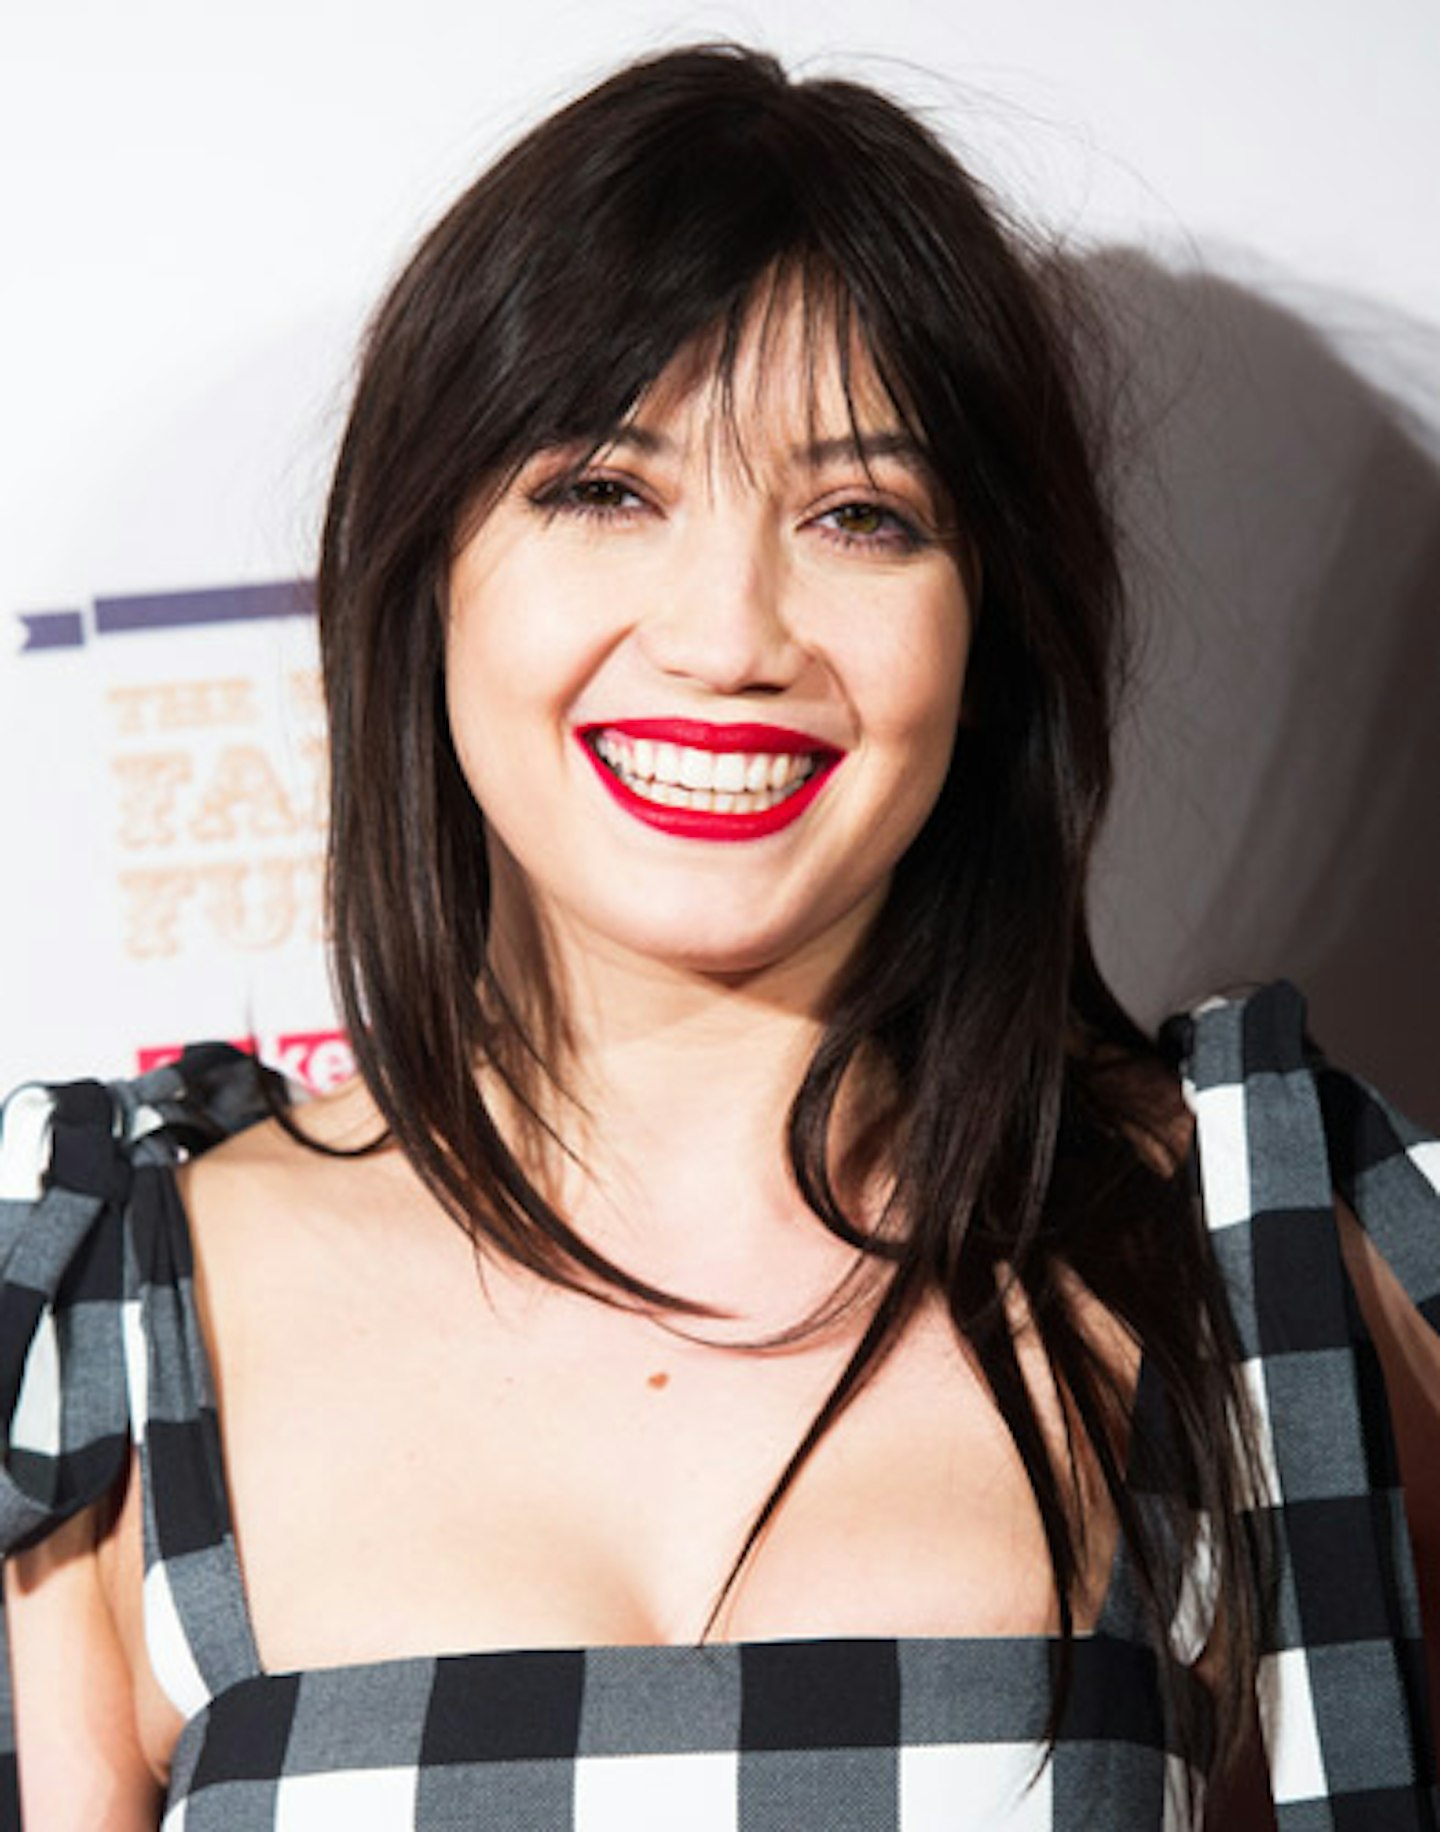 Great Outfits in Fashion History: Daisy Lowe in Ladylike Louis Vuitton -  Fashionista